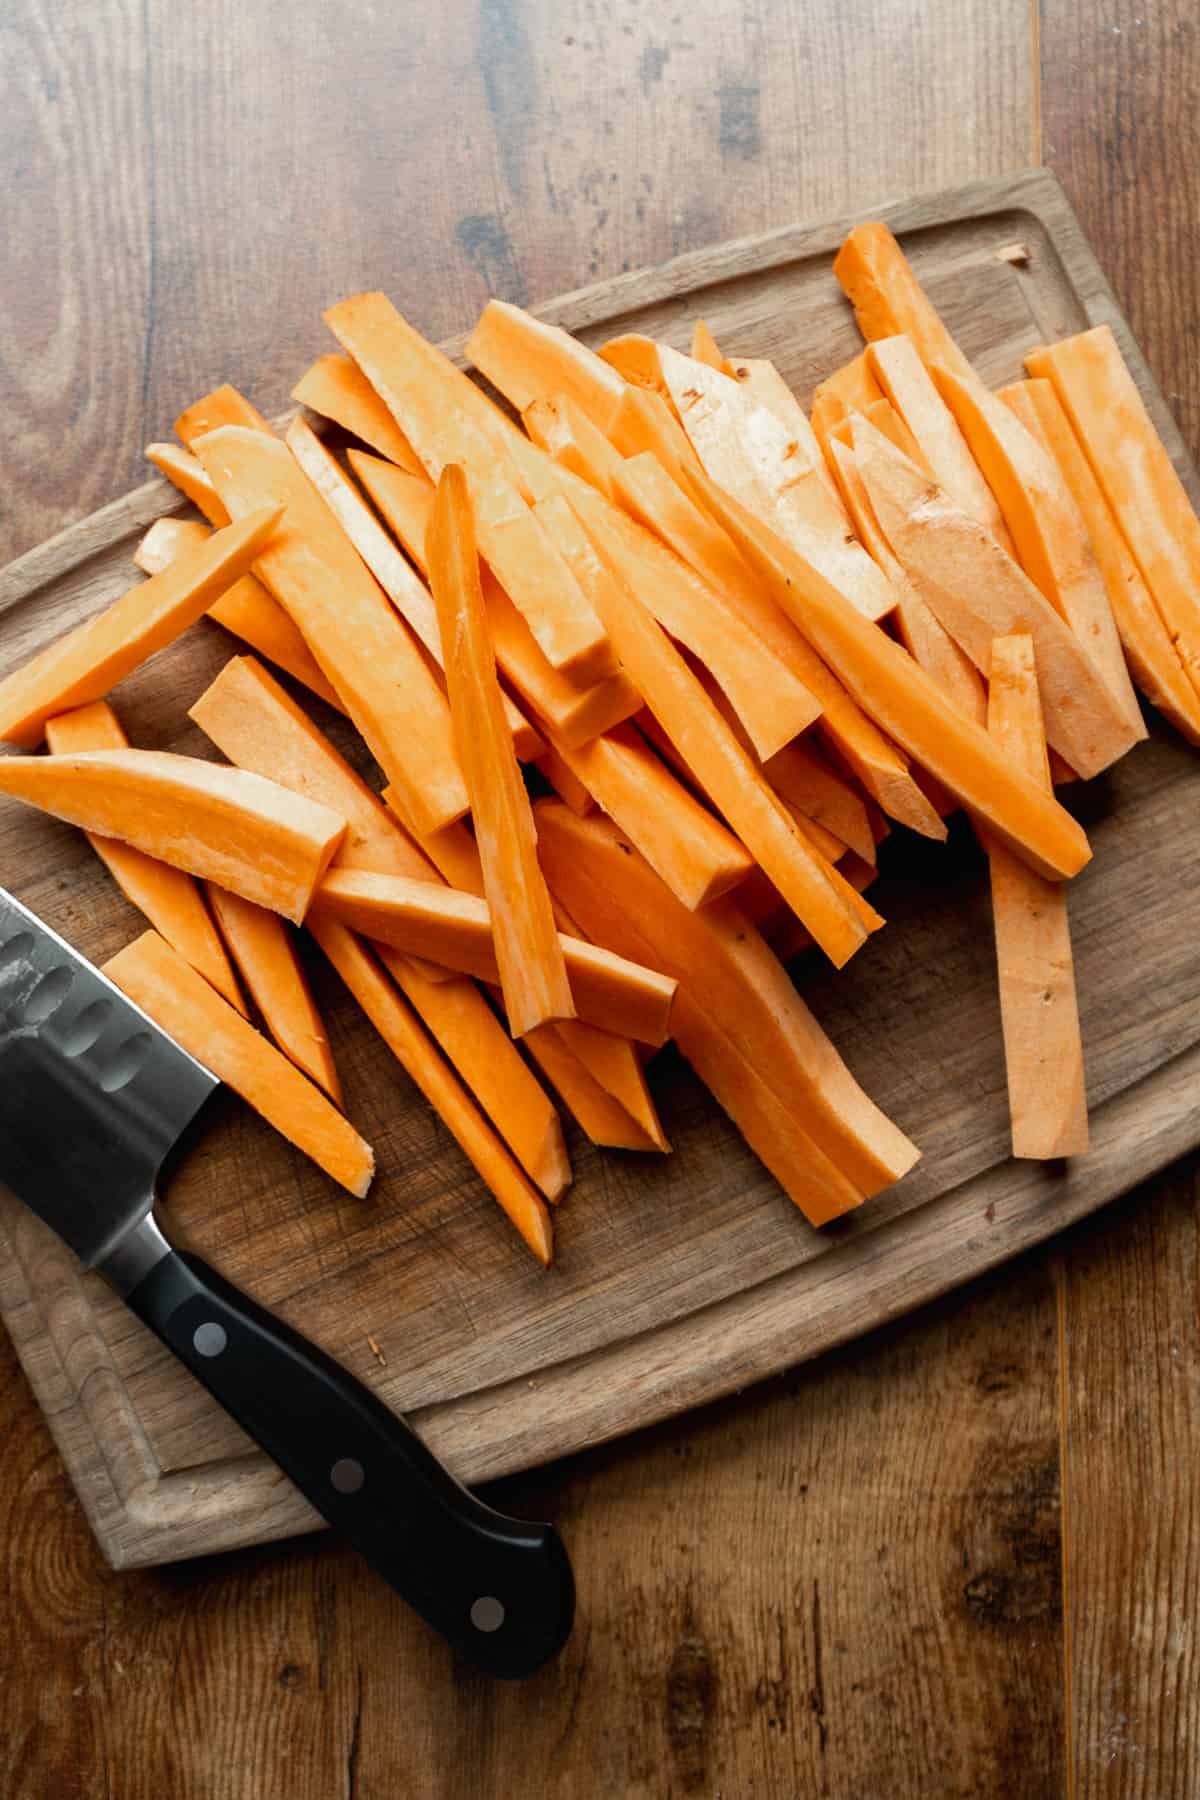 Sweet potatoes cut into fries on a wooden cutting board with a knife.